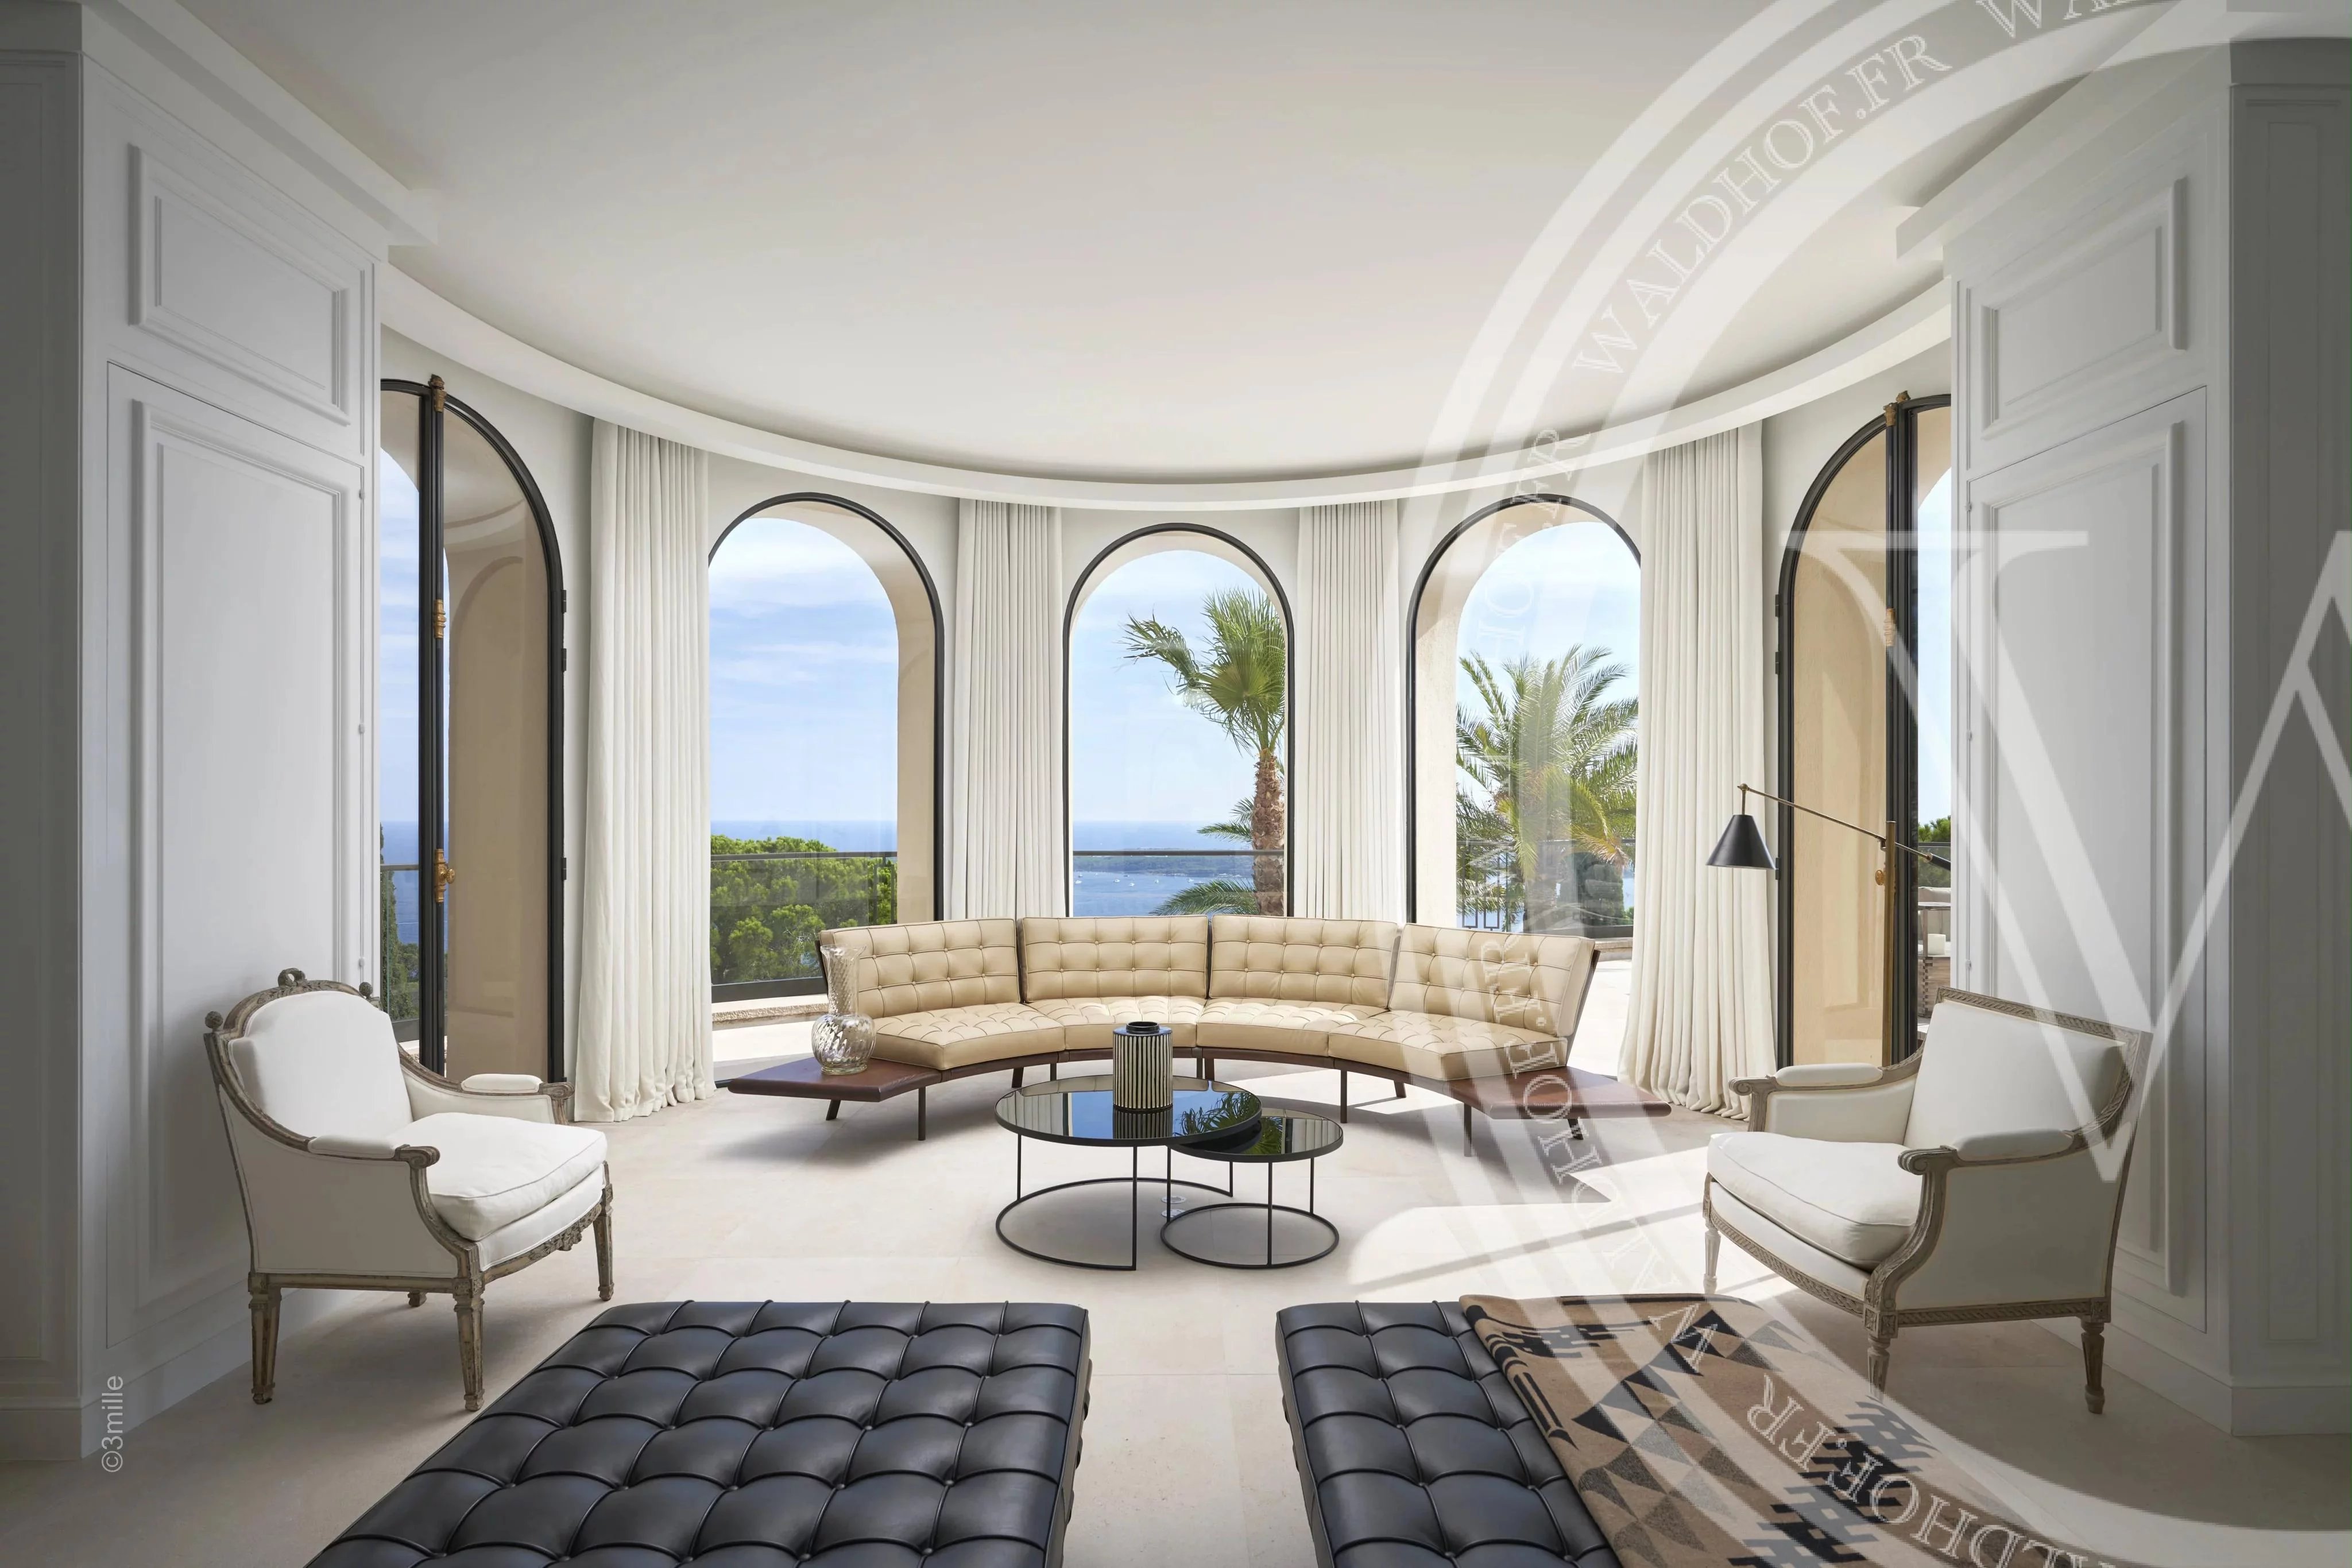 Fully renovated 2500 m2 Palace overlooking all of Cannes